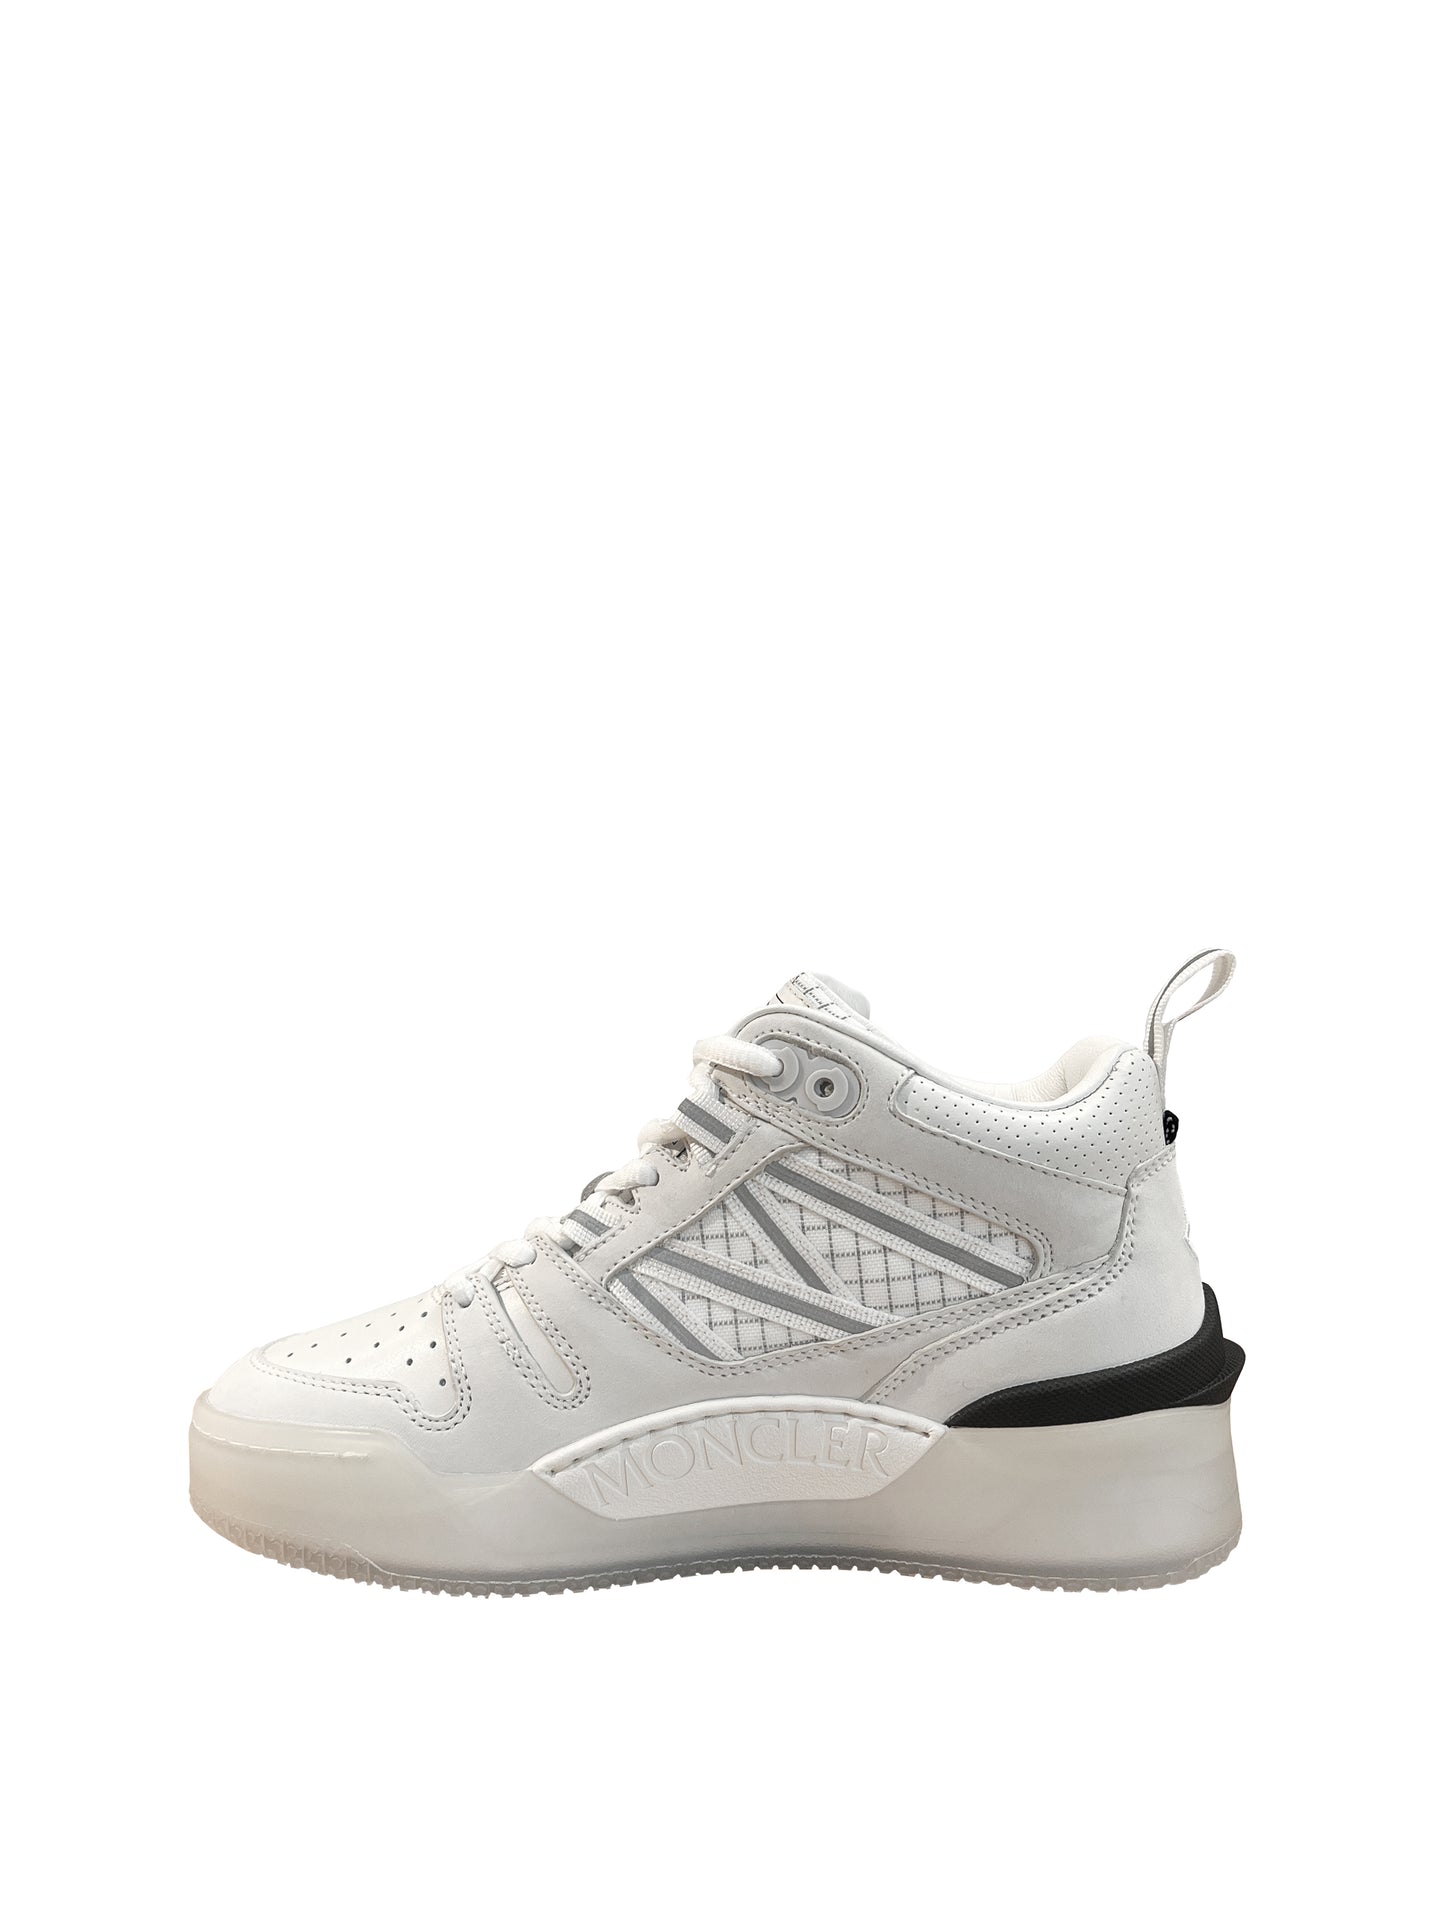 Moncler Sneakers Pivot Weiss